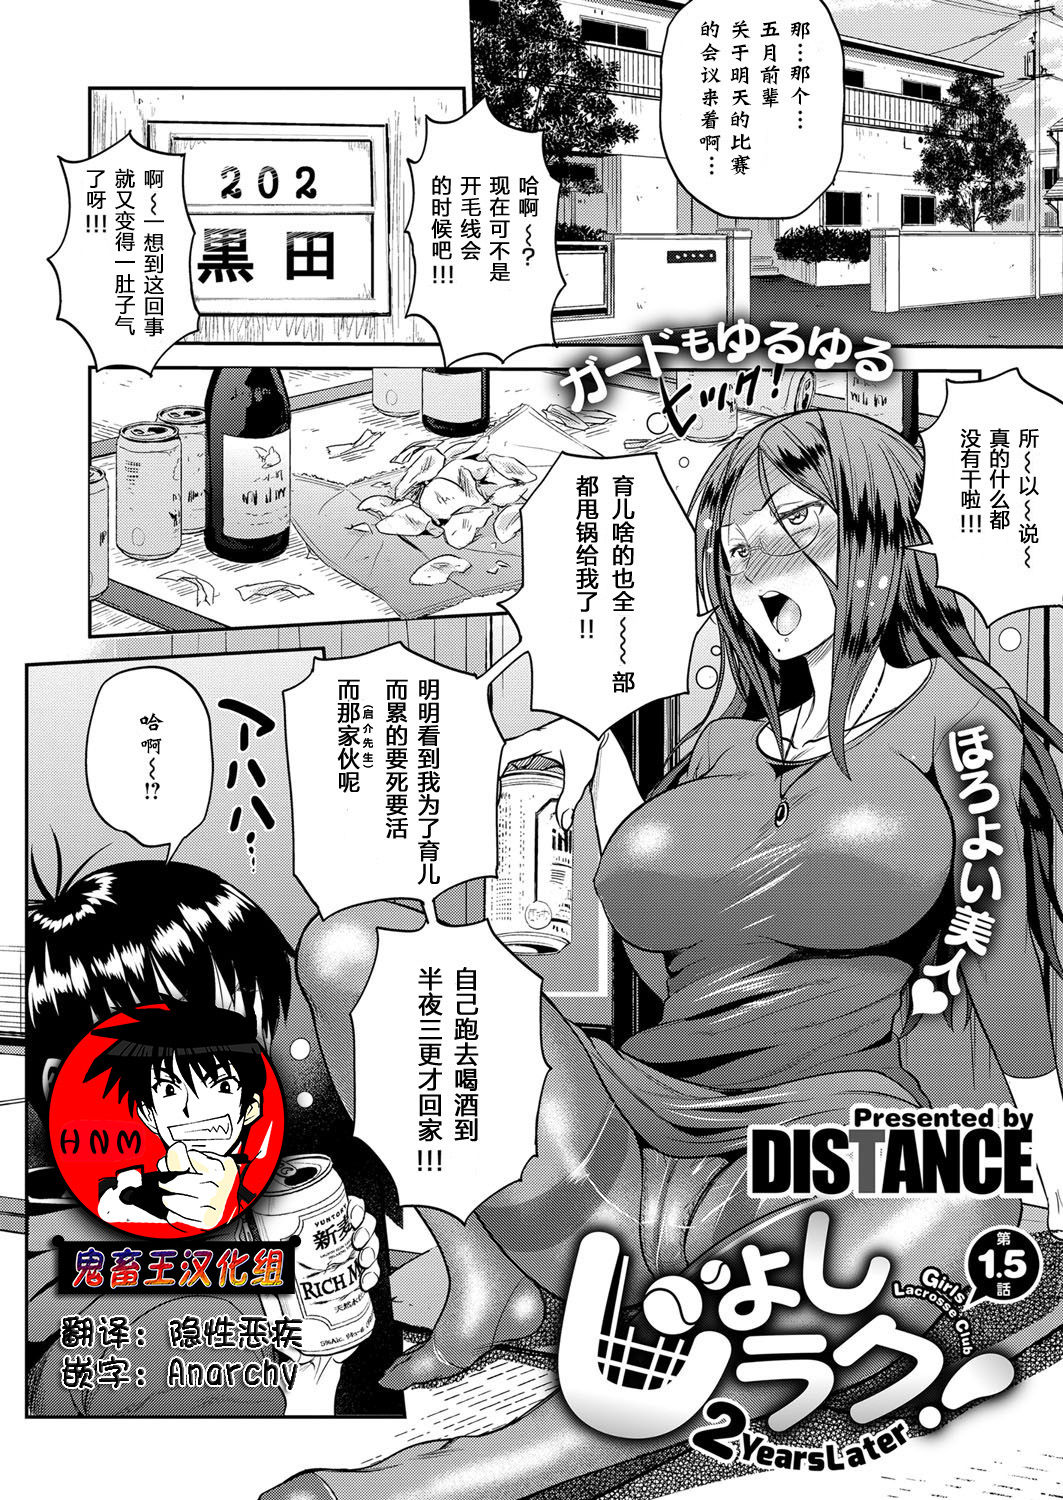 [DISTANCE] Joshi Lacu! - Girls Lacrosse Club ~2 Years Later~ Ch. 1.5 (COMIC ExE 06) [Chinese] [鬼畜王汉化组] [Digital] [DISTANCE] じょしラク！～2Years Later～ 第1.5話 (コミック エグゼ 06) [中文翻譯] [DL版]